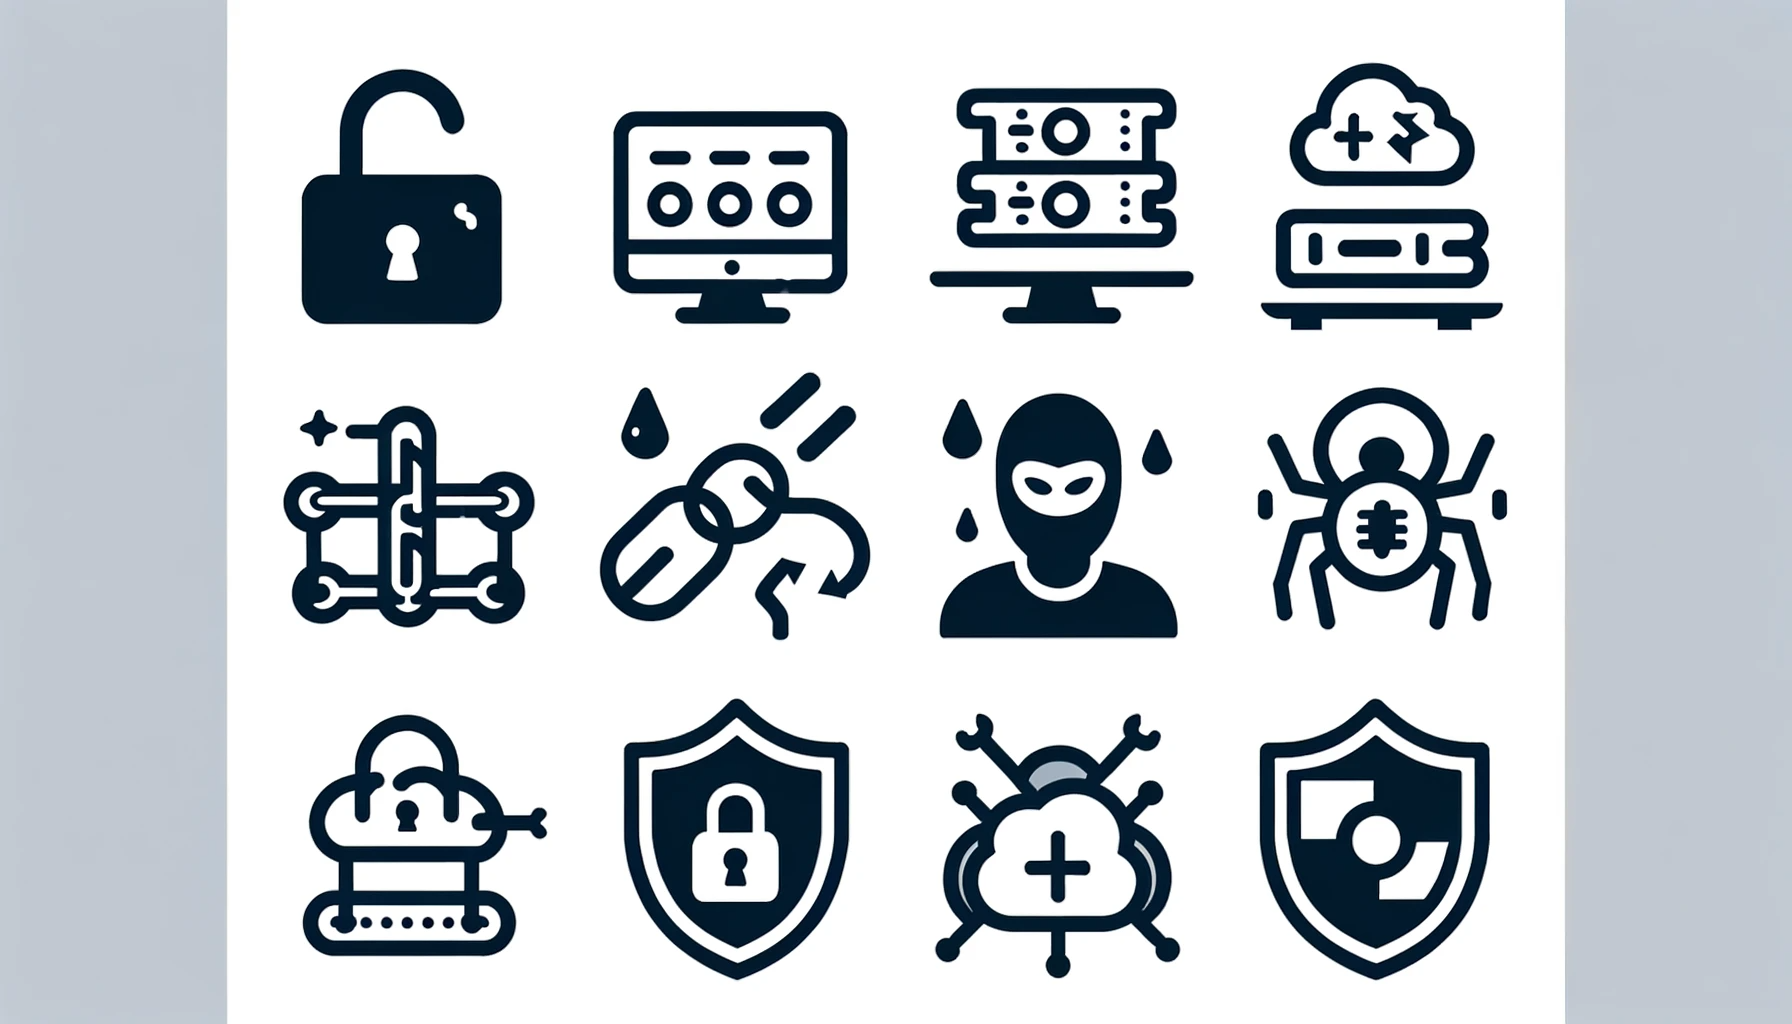 A set of icons representing various self-hosted services.